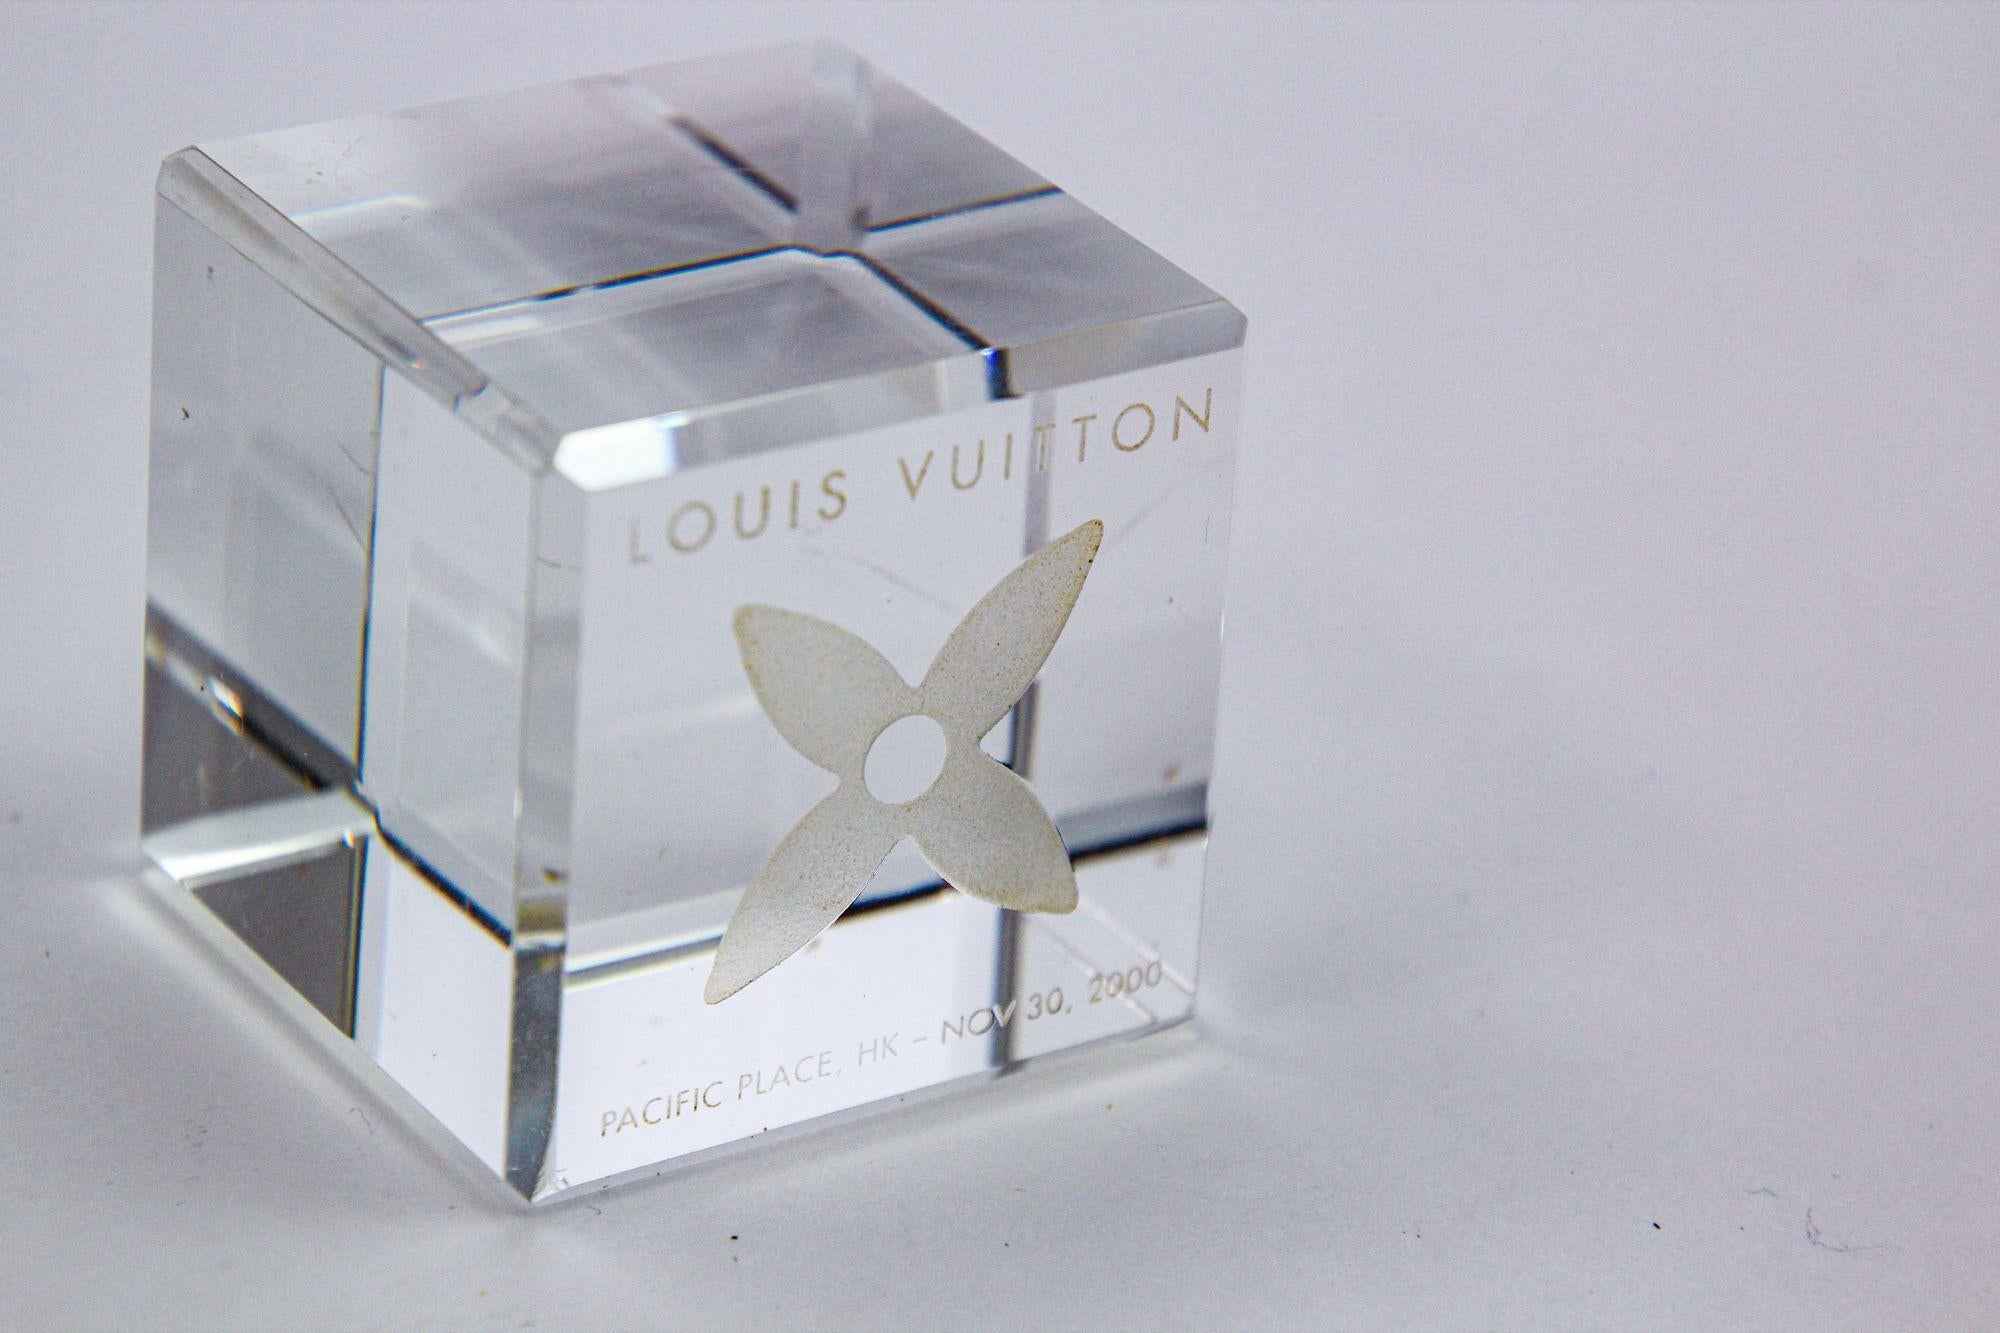 LOUIS VUITTON Cube Paperweight LOUIS VUITTON Monogram Crystal Paper Weight For Sale 9